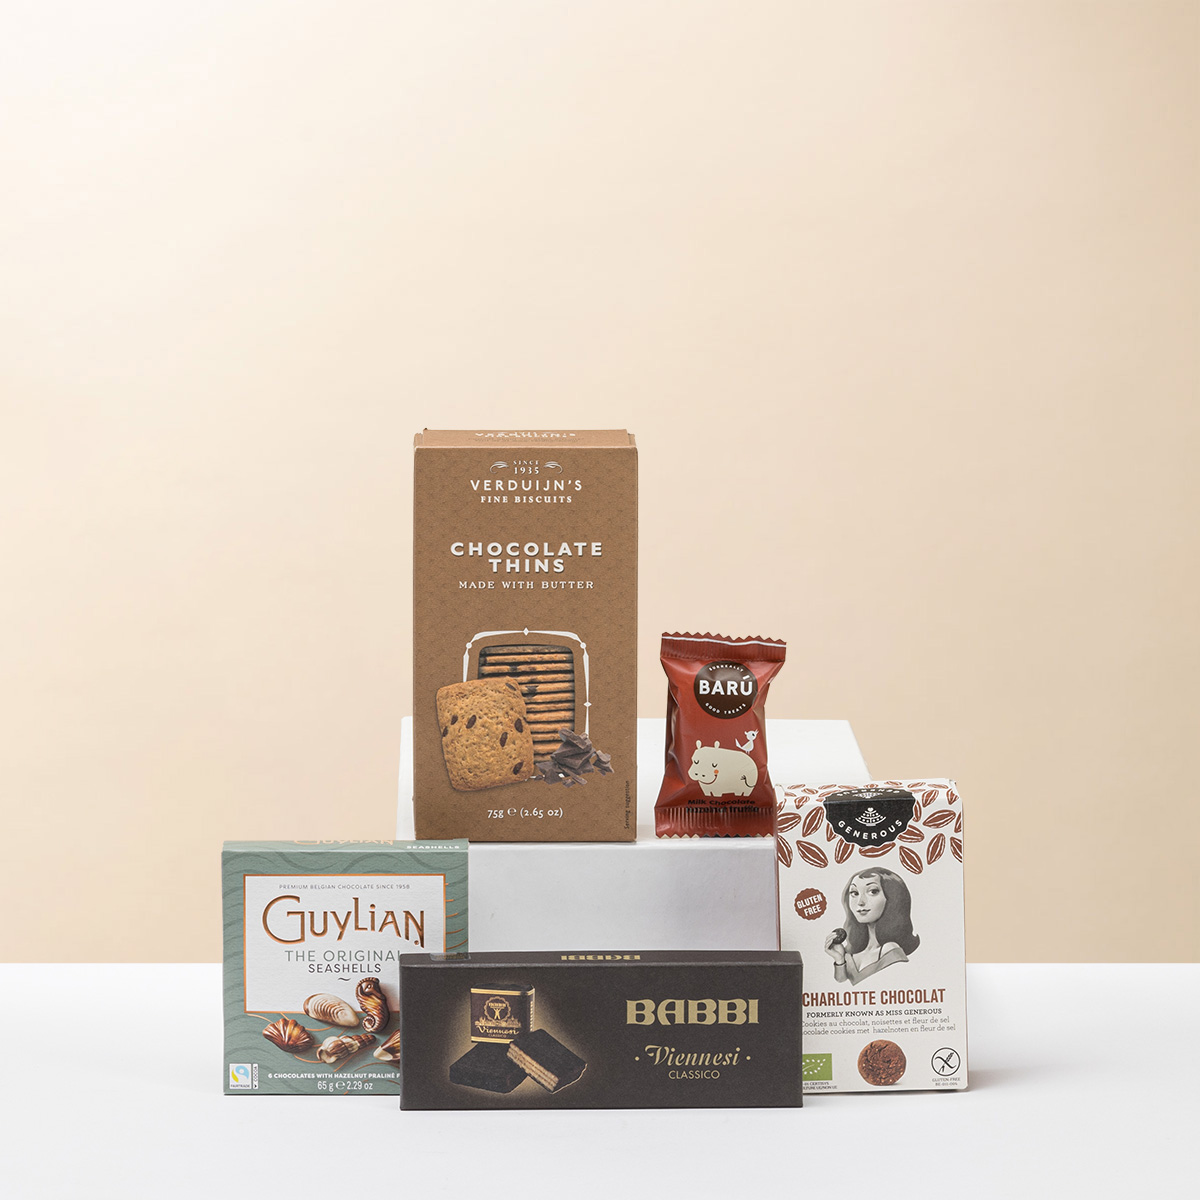 Everyone loves our super popular Chocoholic gift boxes! Surprise your friends, family, employees, and colleagues with this delicious assortment of Belgian chocolates, gourmet cookies, and fluffy marshmallow.